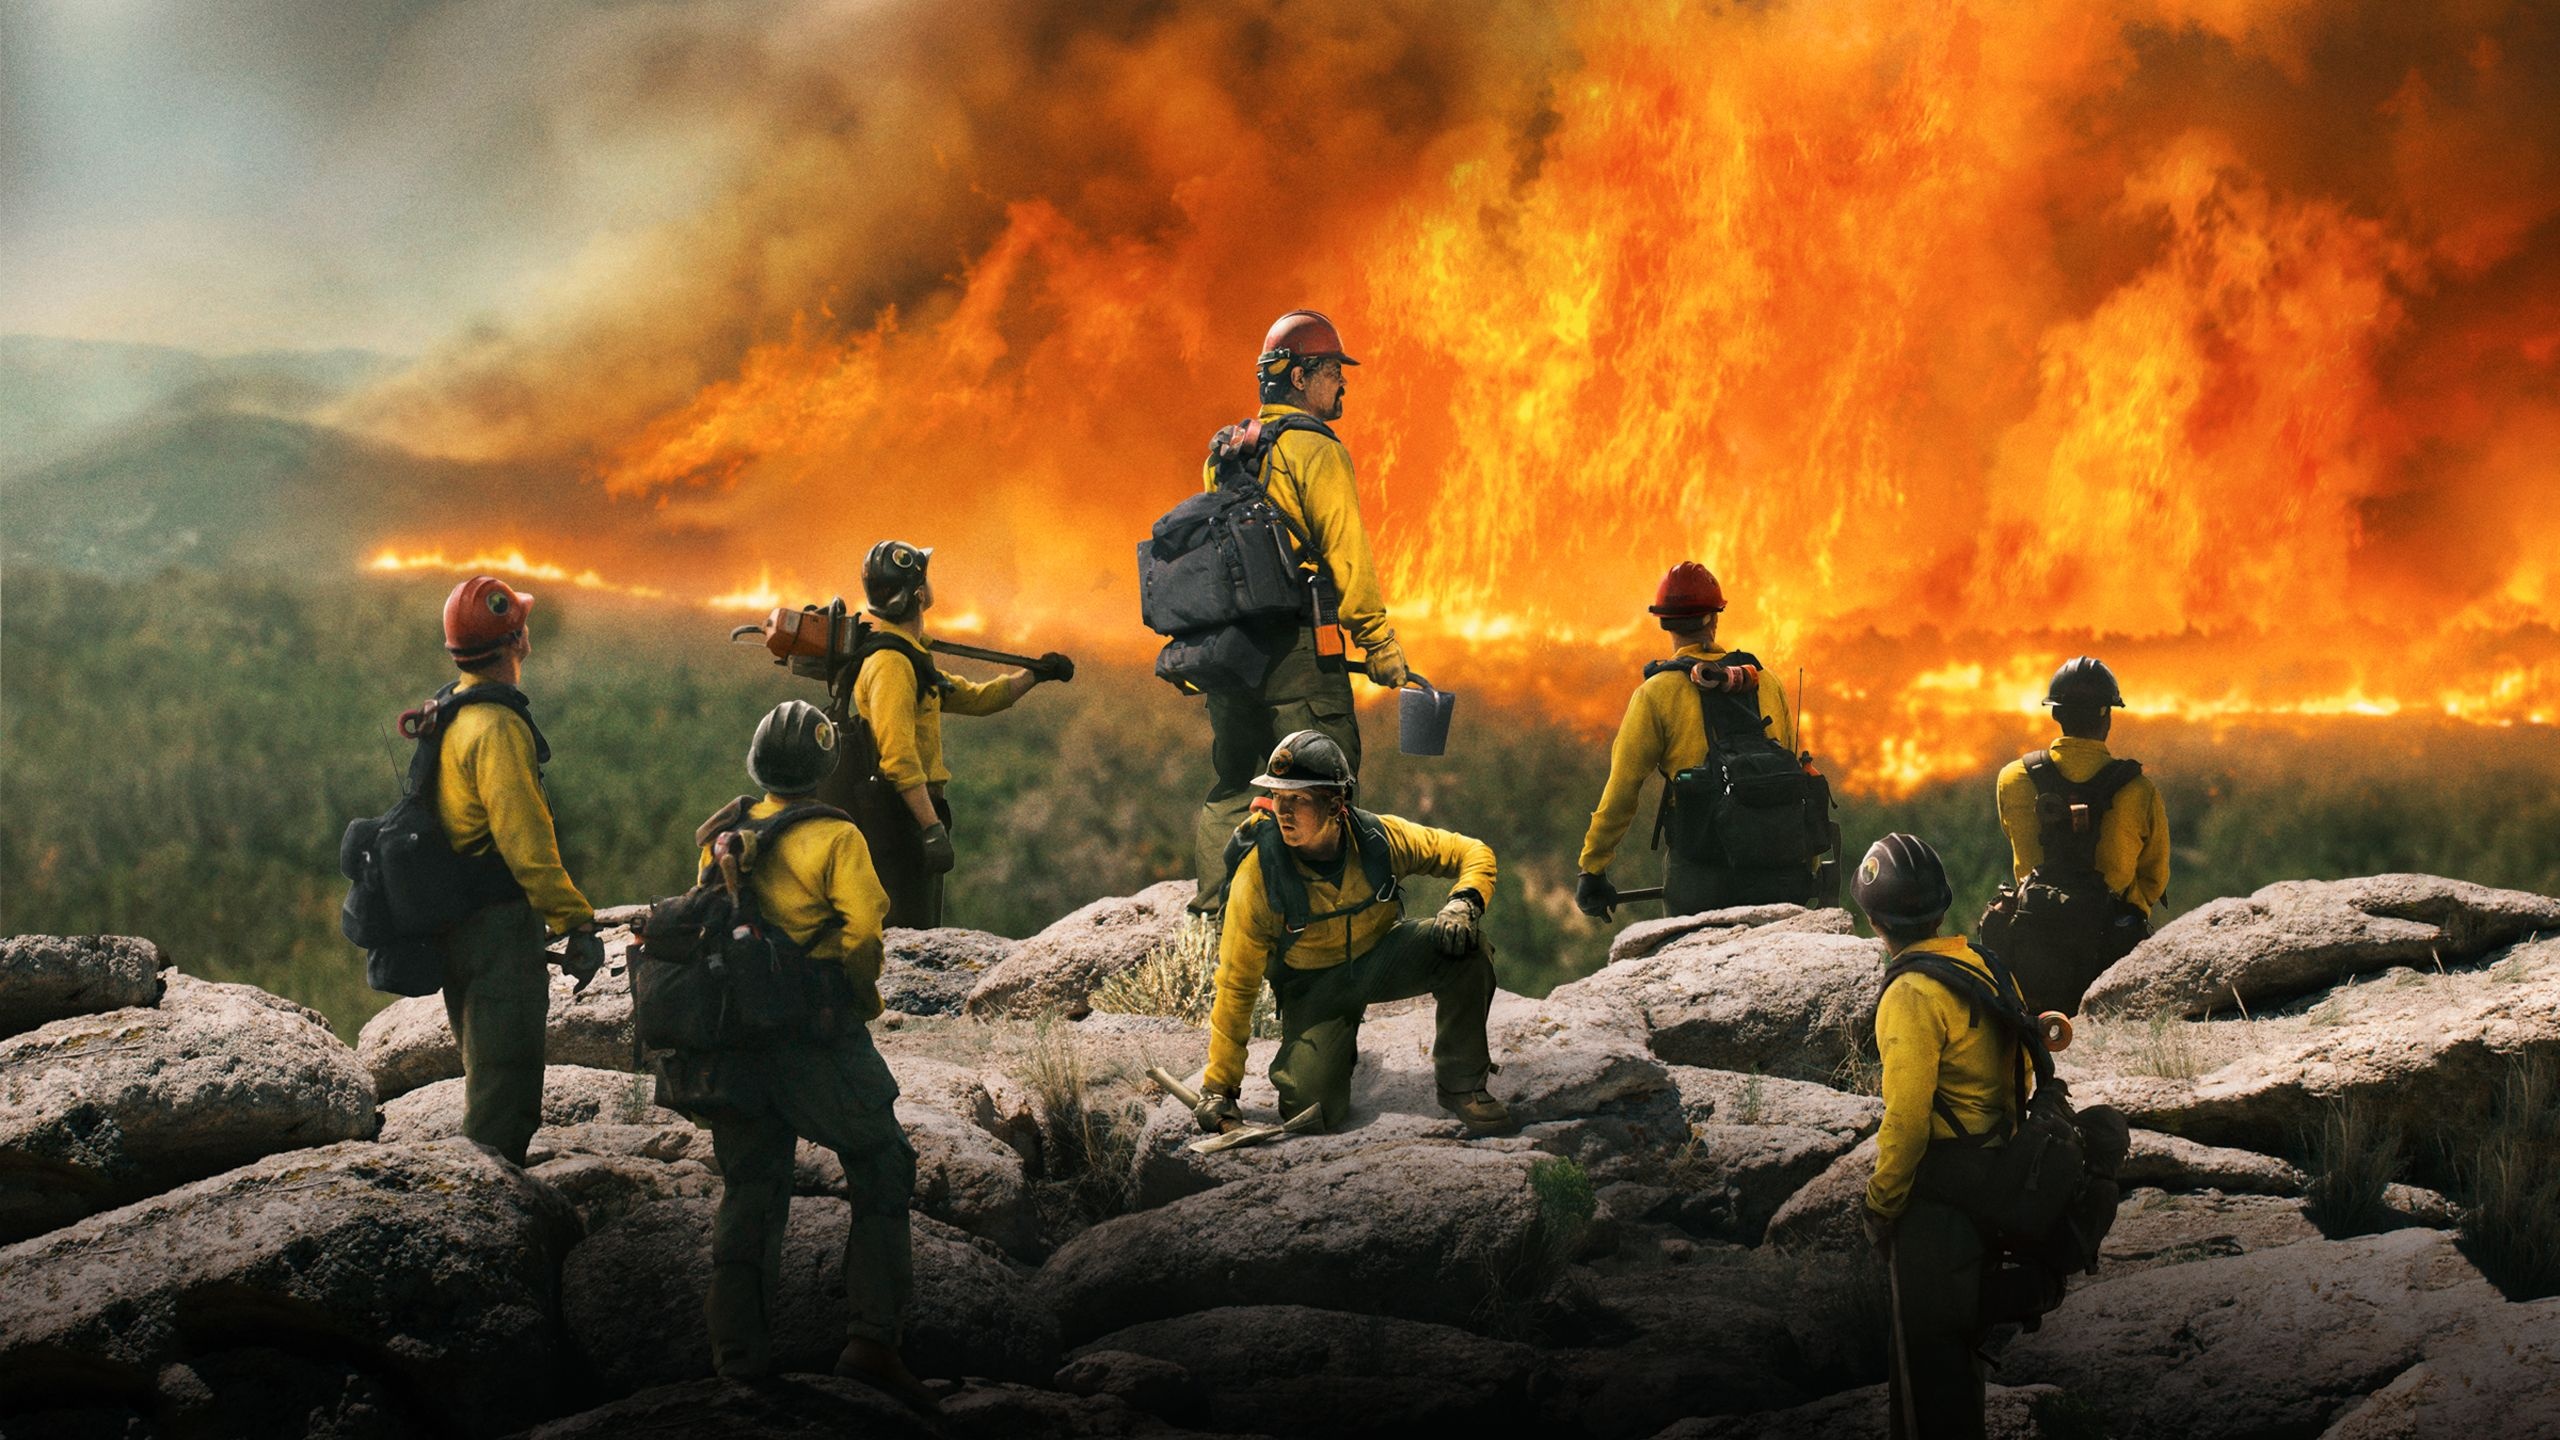 Movies anywhere, Brave firefighters, True story, Heroic sacrifices, 2560x1440 HD Desktop